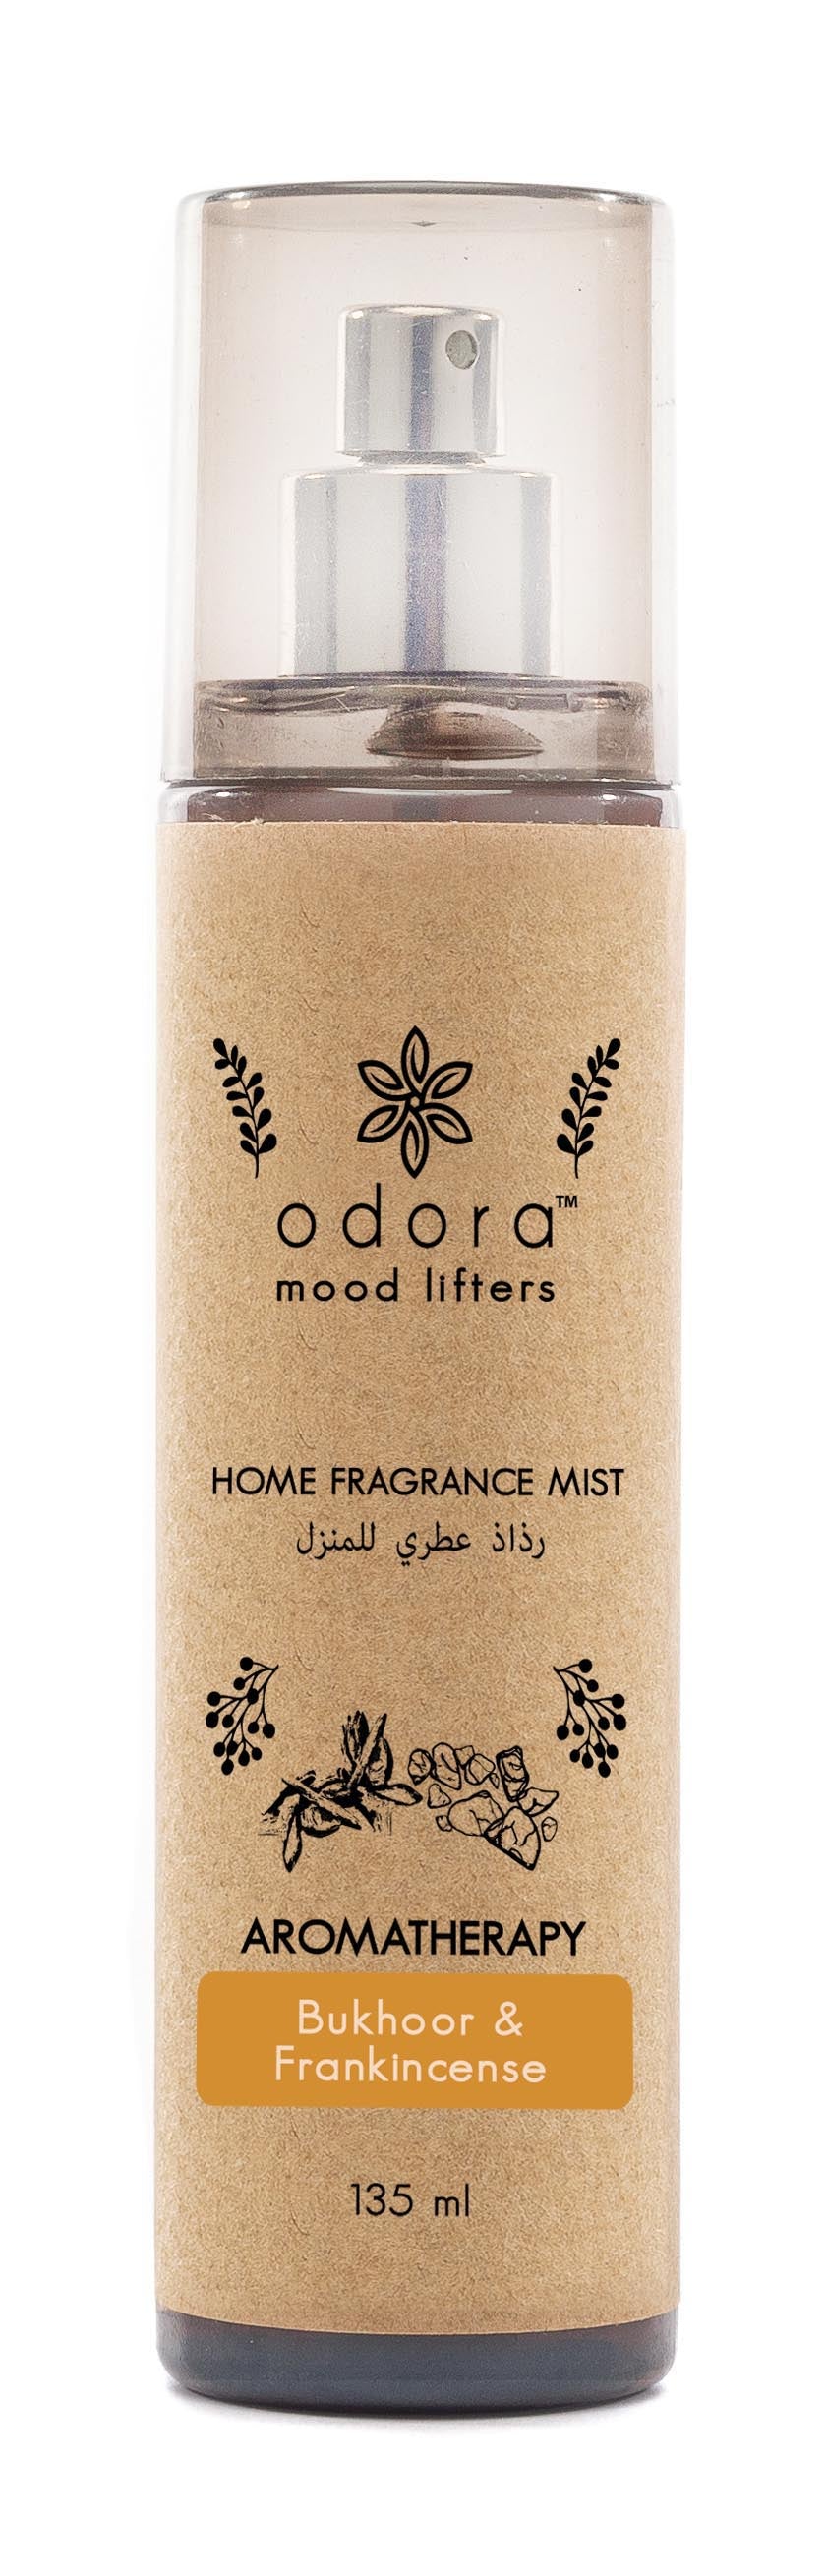 Odora Mood Lifters Home Scent | Best Fragrance in Bahrain | Halabh